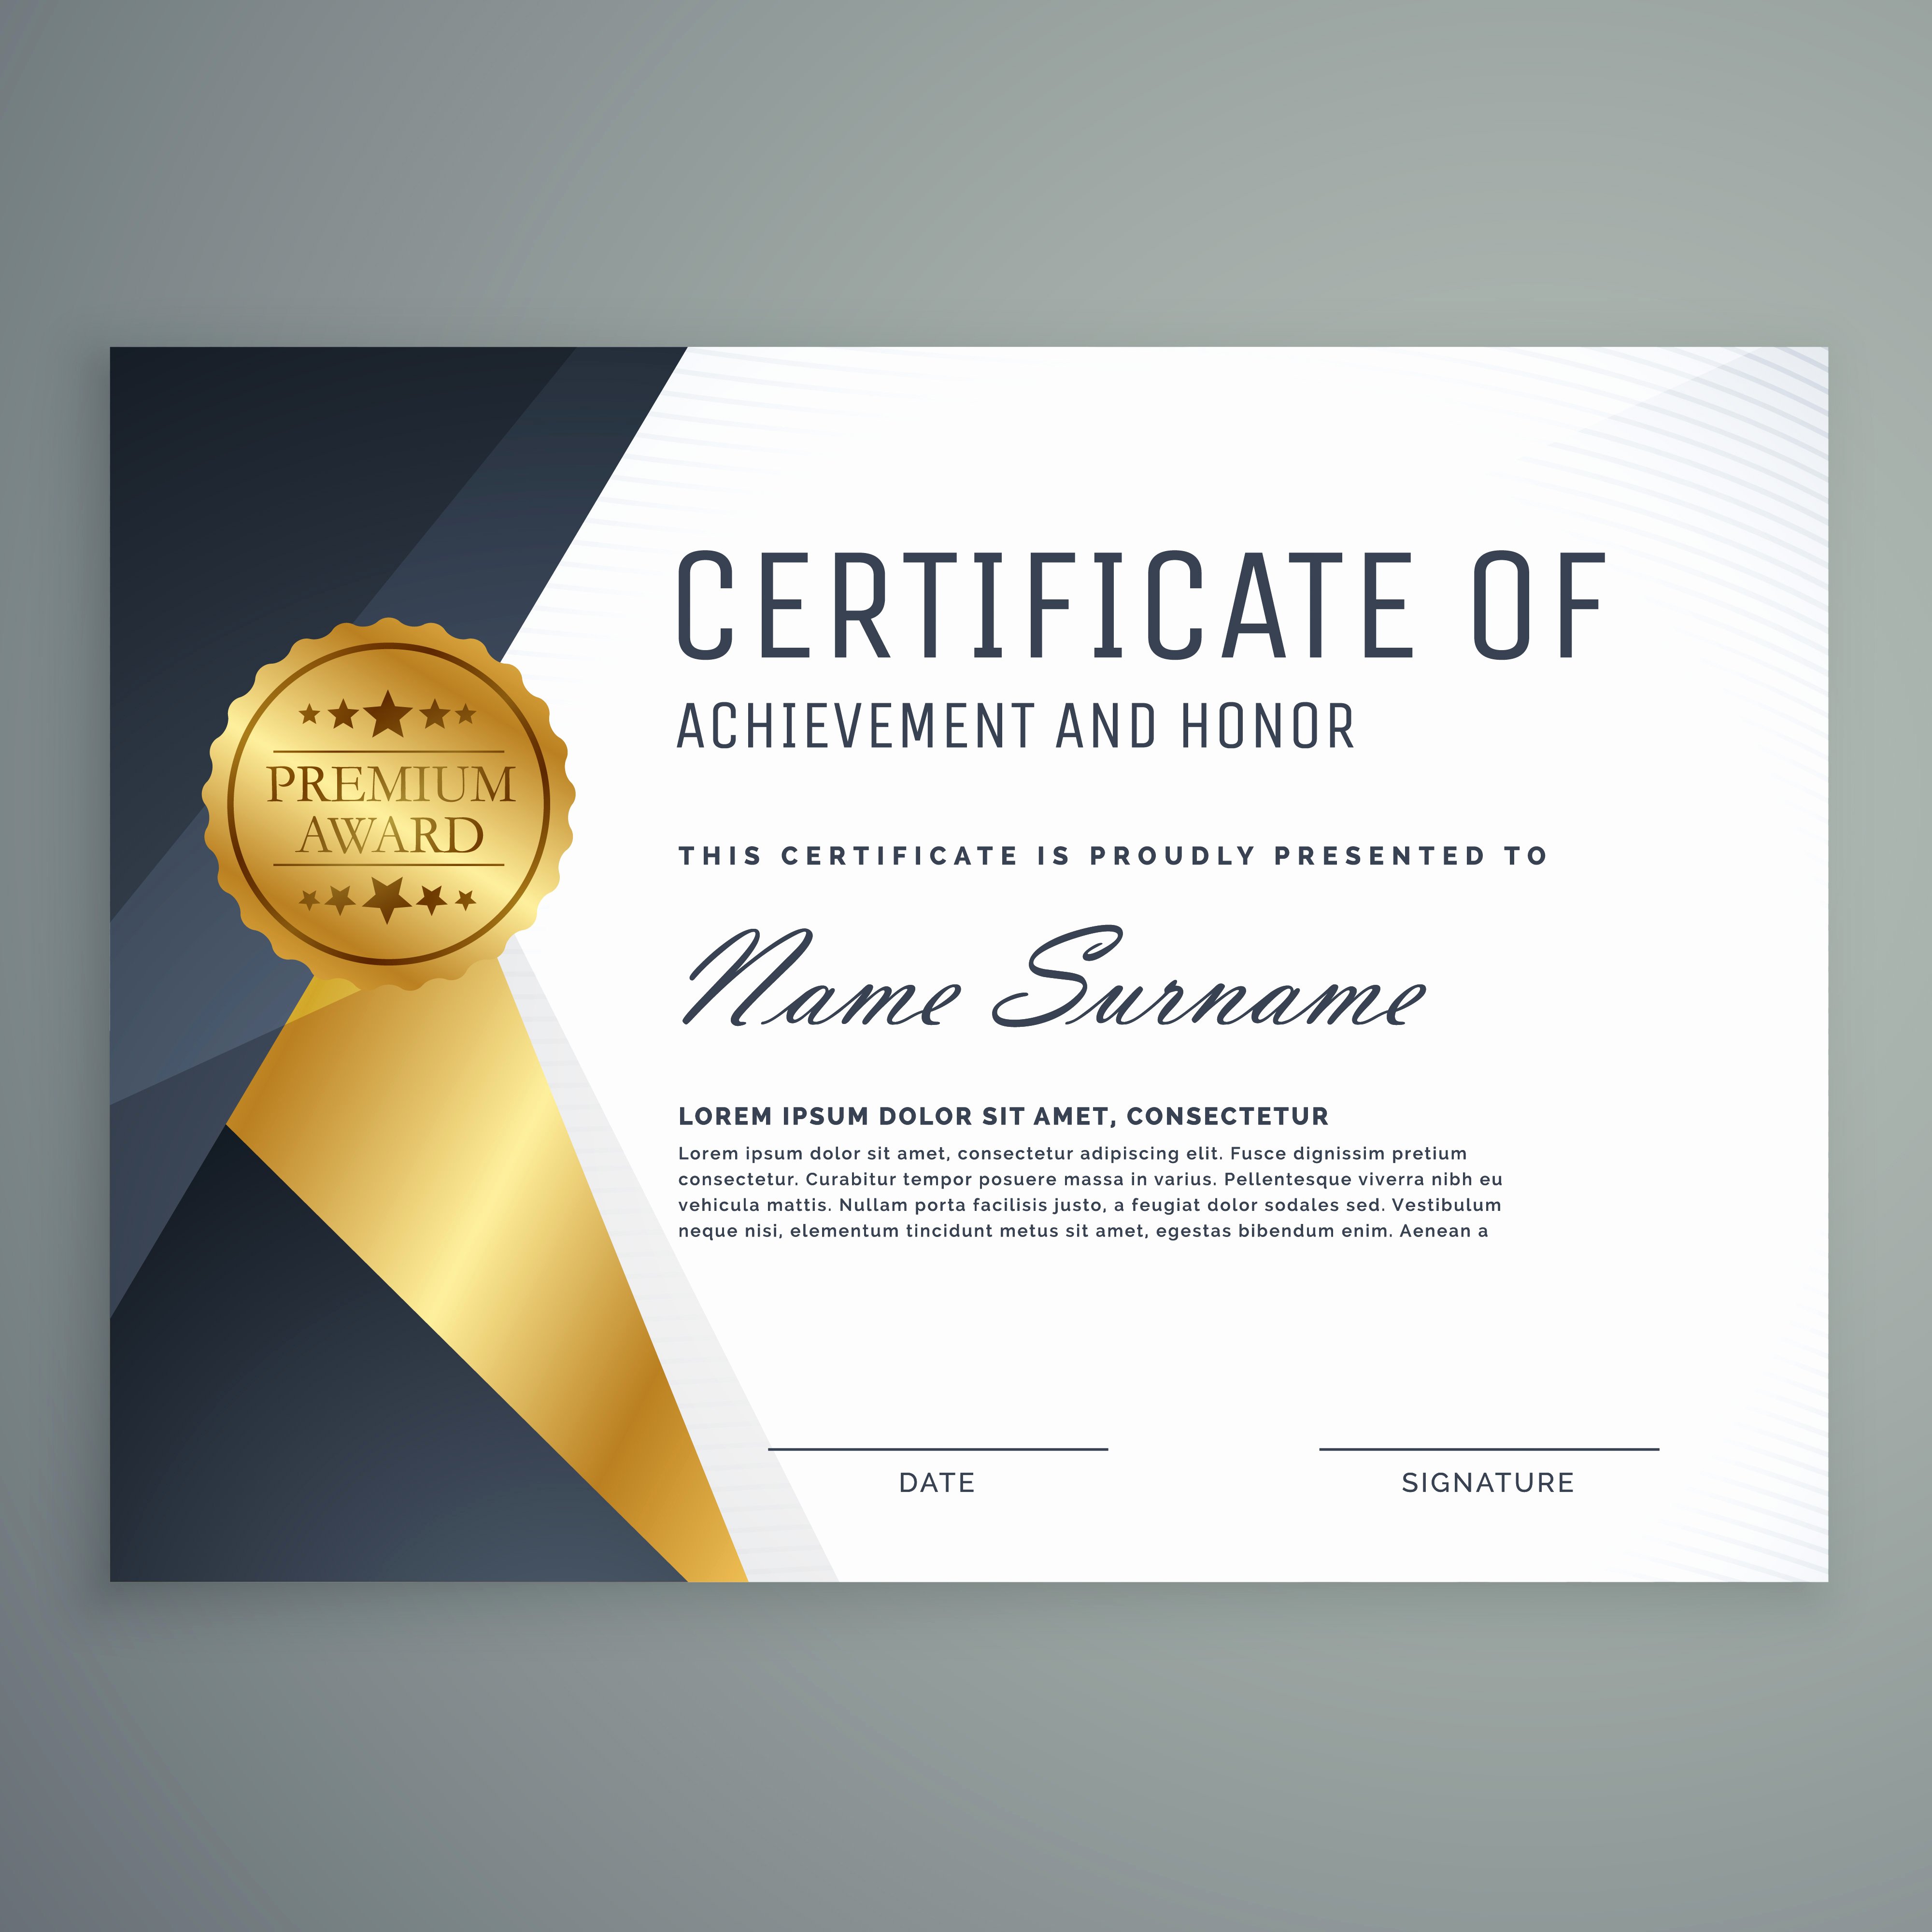 Certificate Of Appreciation Graduation Awesome Premium Certificate Of Appreciation Award Design Download Free Vector Art Stock Graphics &amp;